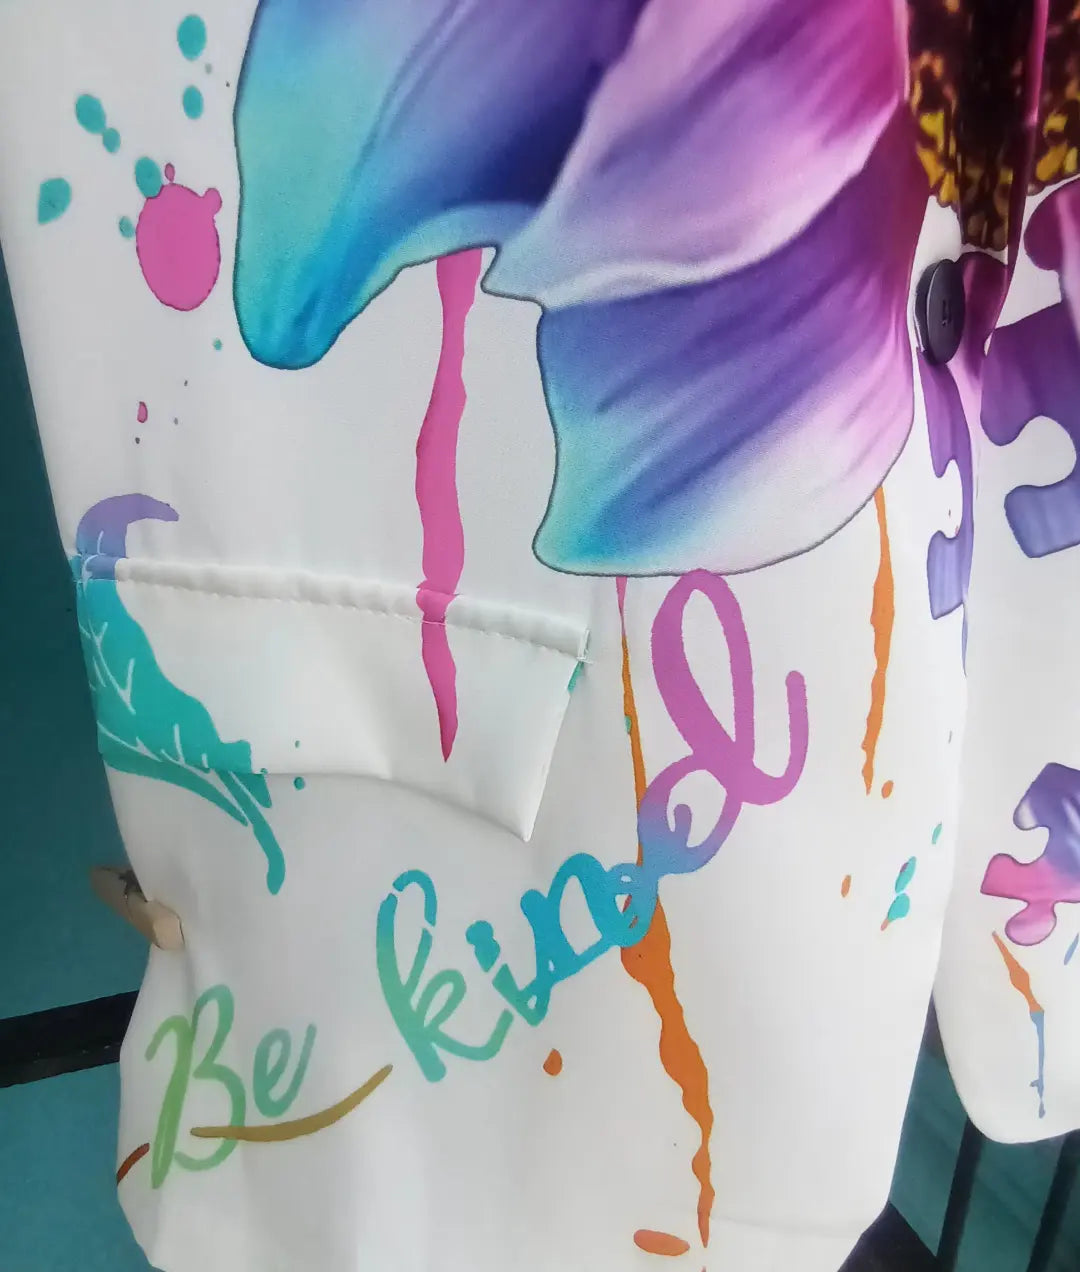 'RAINBOW FLOWER' BRIGHT AND BEAUTIFUL SCRIPT AND FLORAL PRINT STATEMENT BLAZER